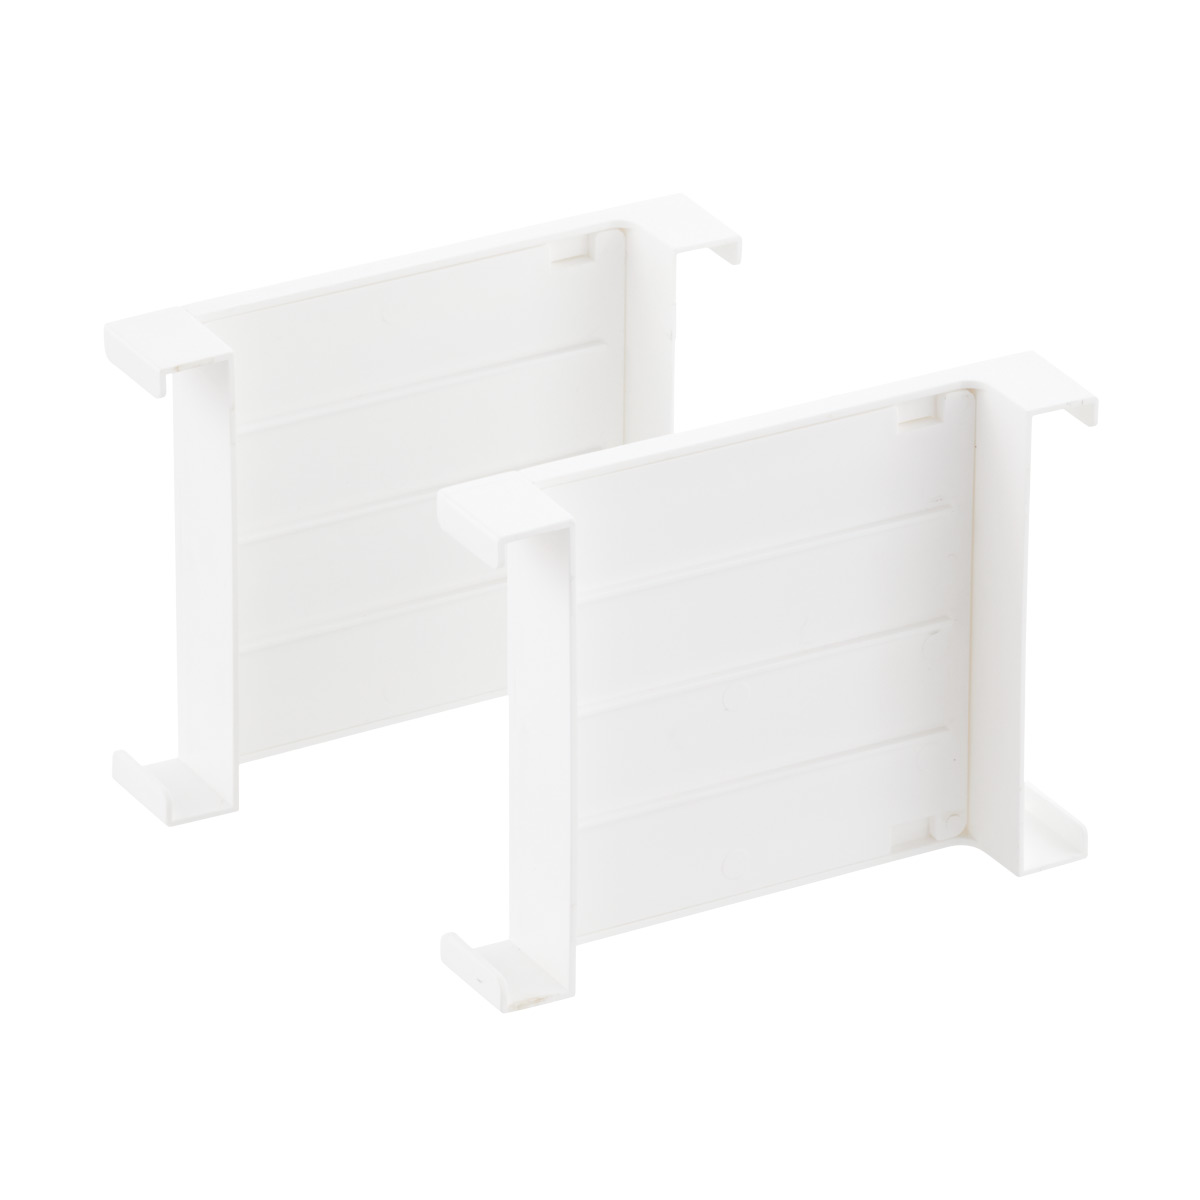 https://www.containerstore.com/catalogimages/314321/10054368-dream-drawer-dividers.jpg